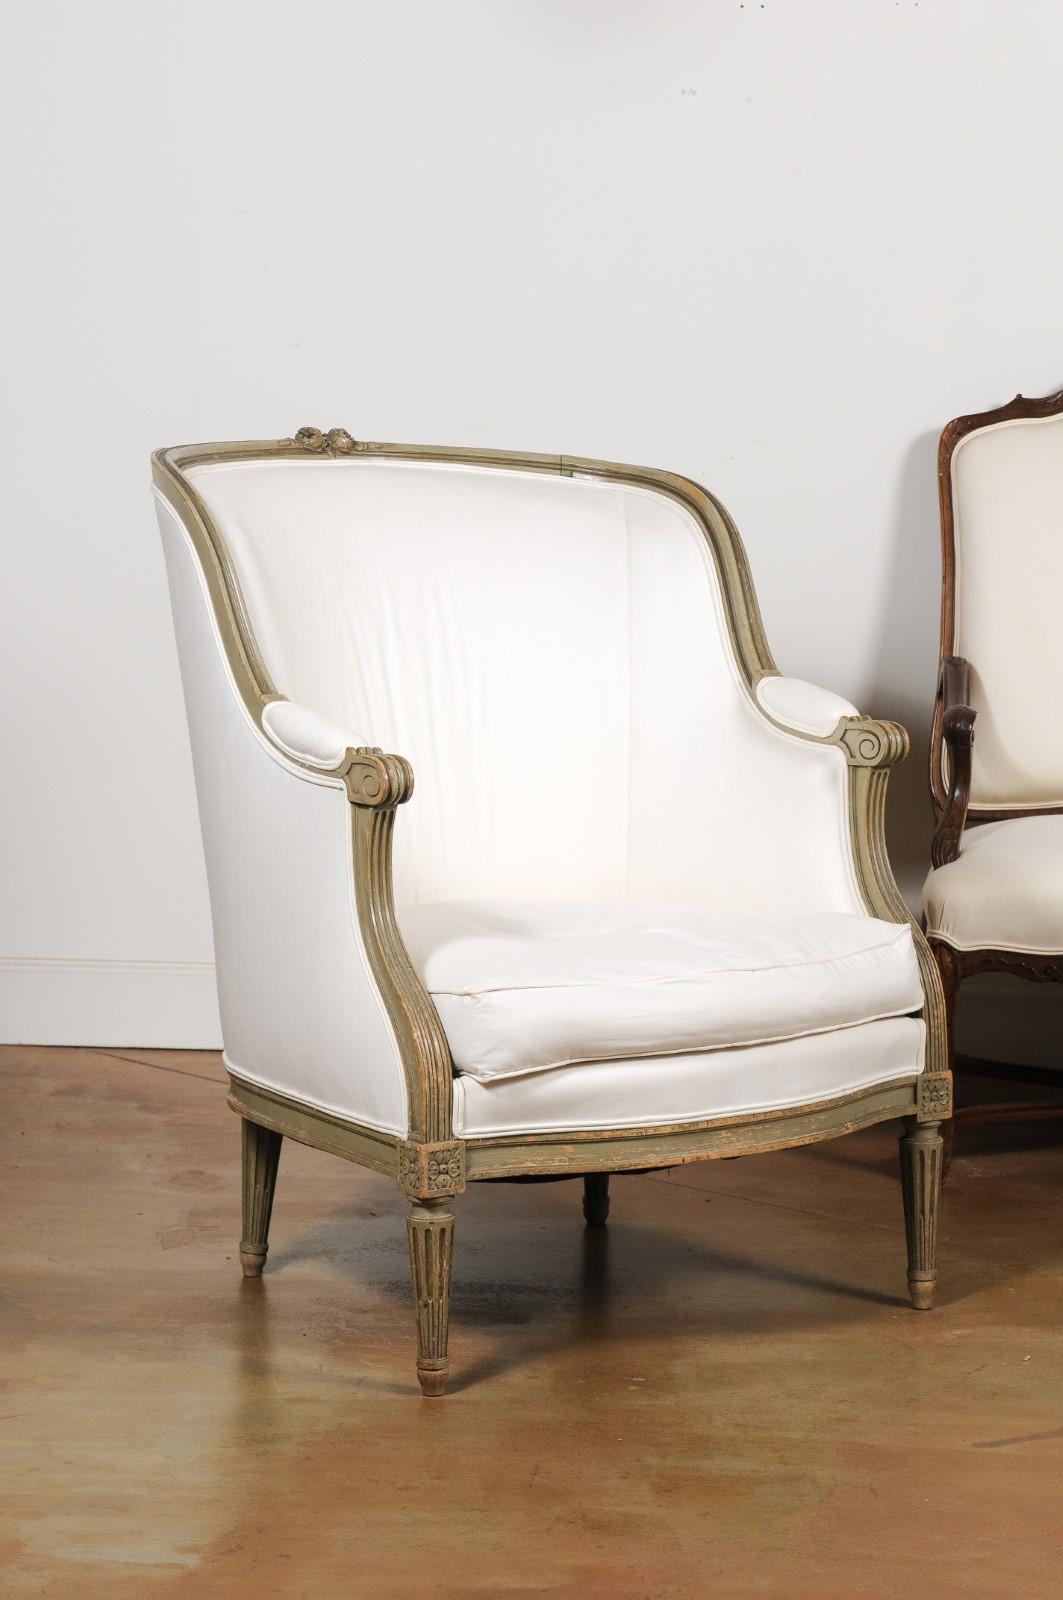 A French Louis XVI style barrel back bergère chair from the late 19th century, with new upholstery. Born in France during the last quarter of the 19th century, this bergère chair features a barrel back accented with two delicate roses and their